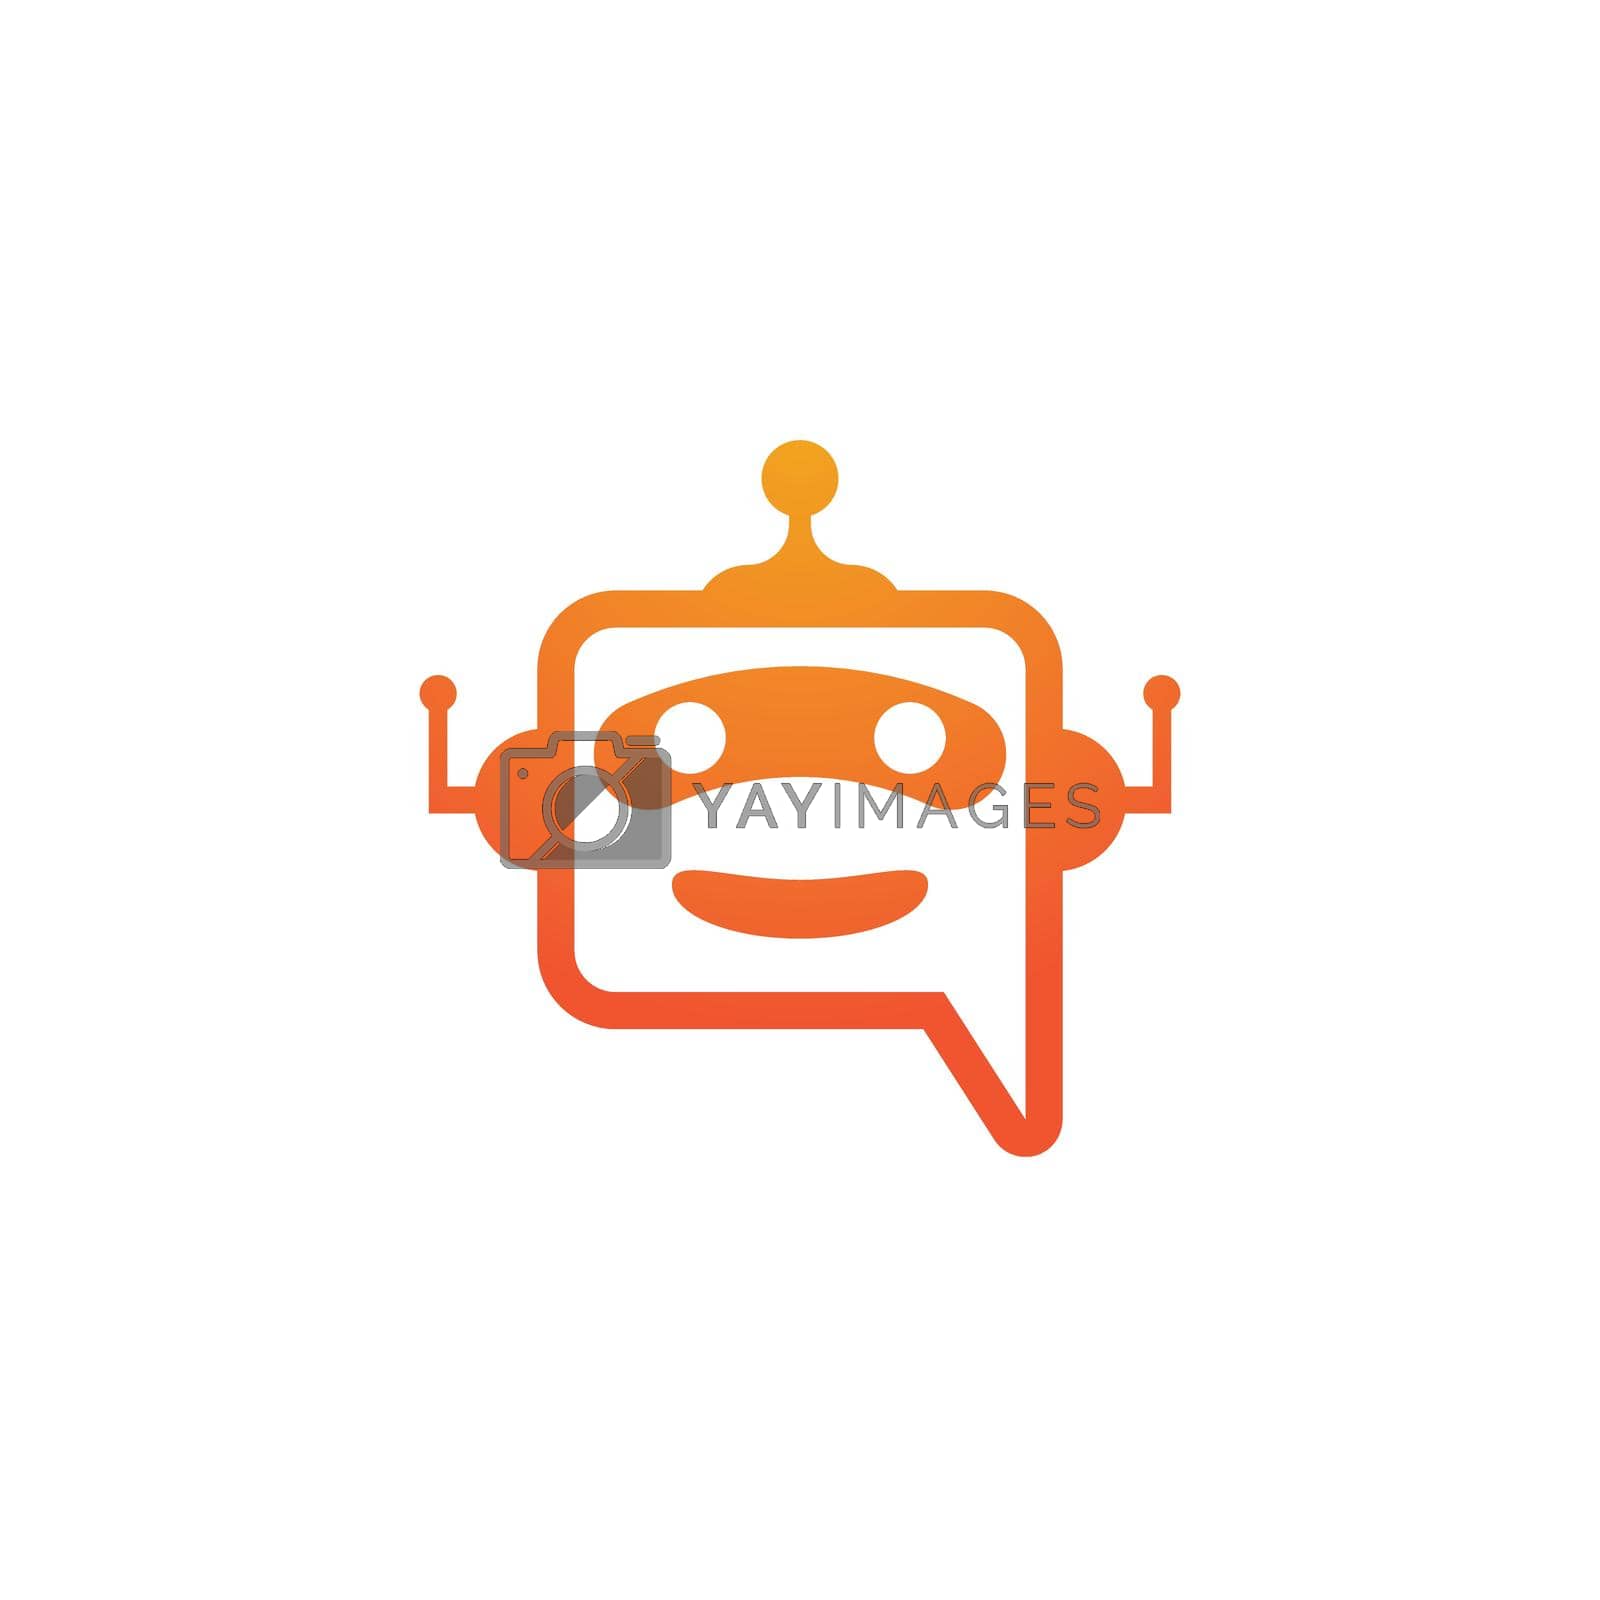 Royalty free image of Chat bot icon by Fat17